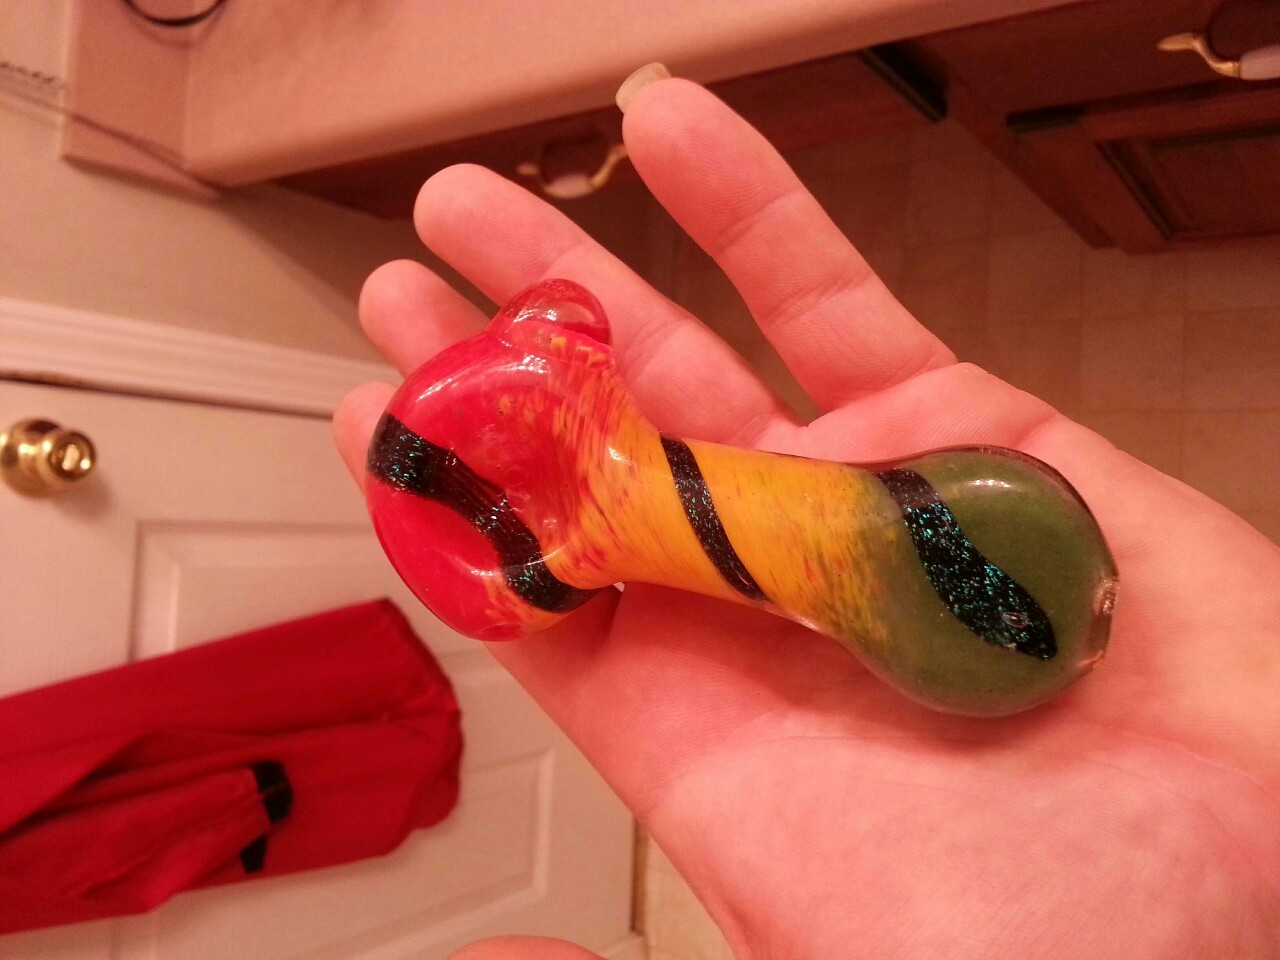 Got me a new glass piece finally and yes I have huge hands so it&rsquo;s pretty